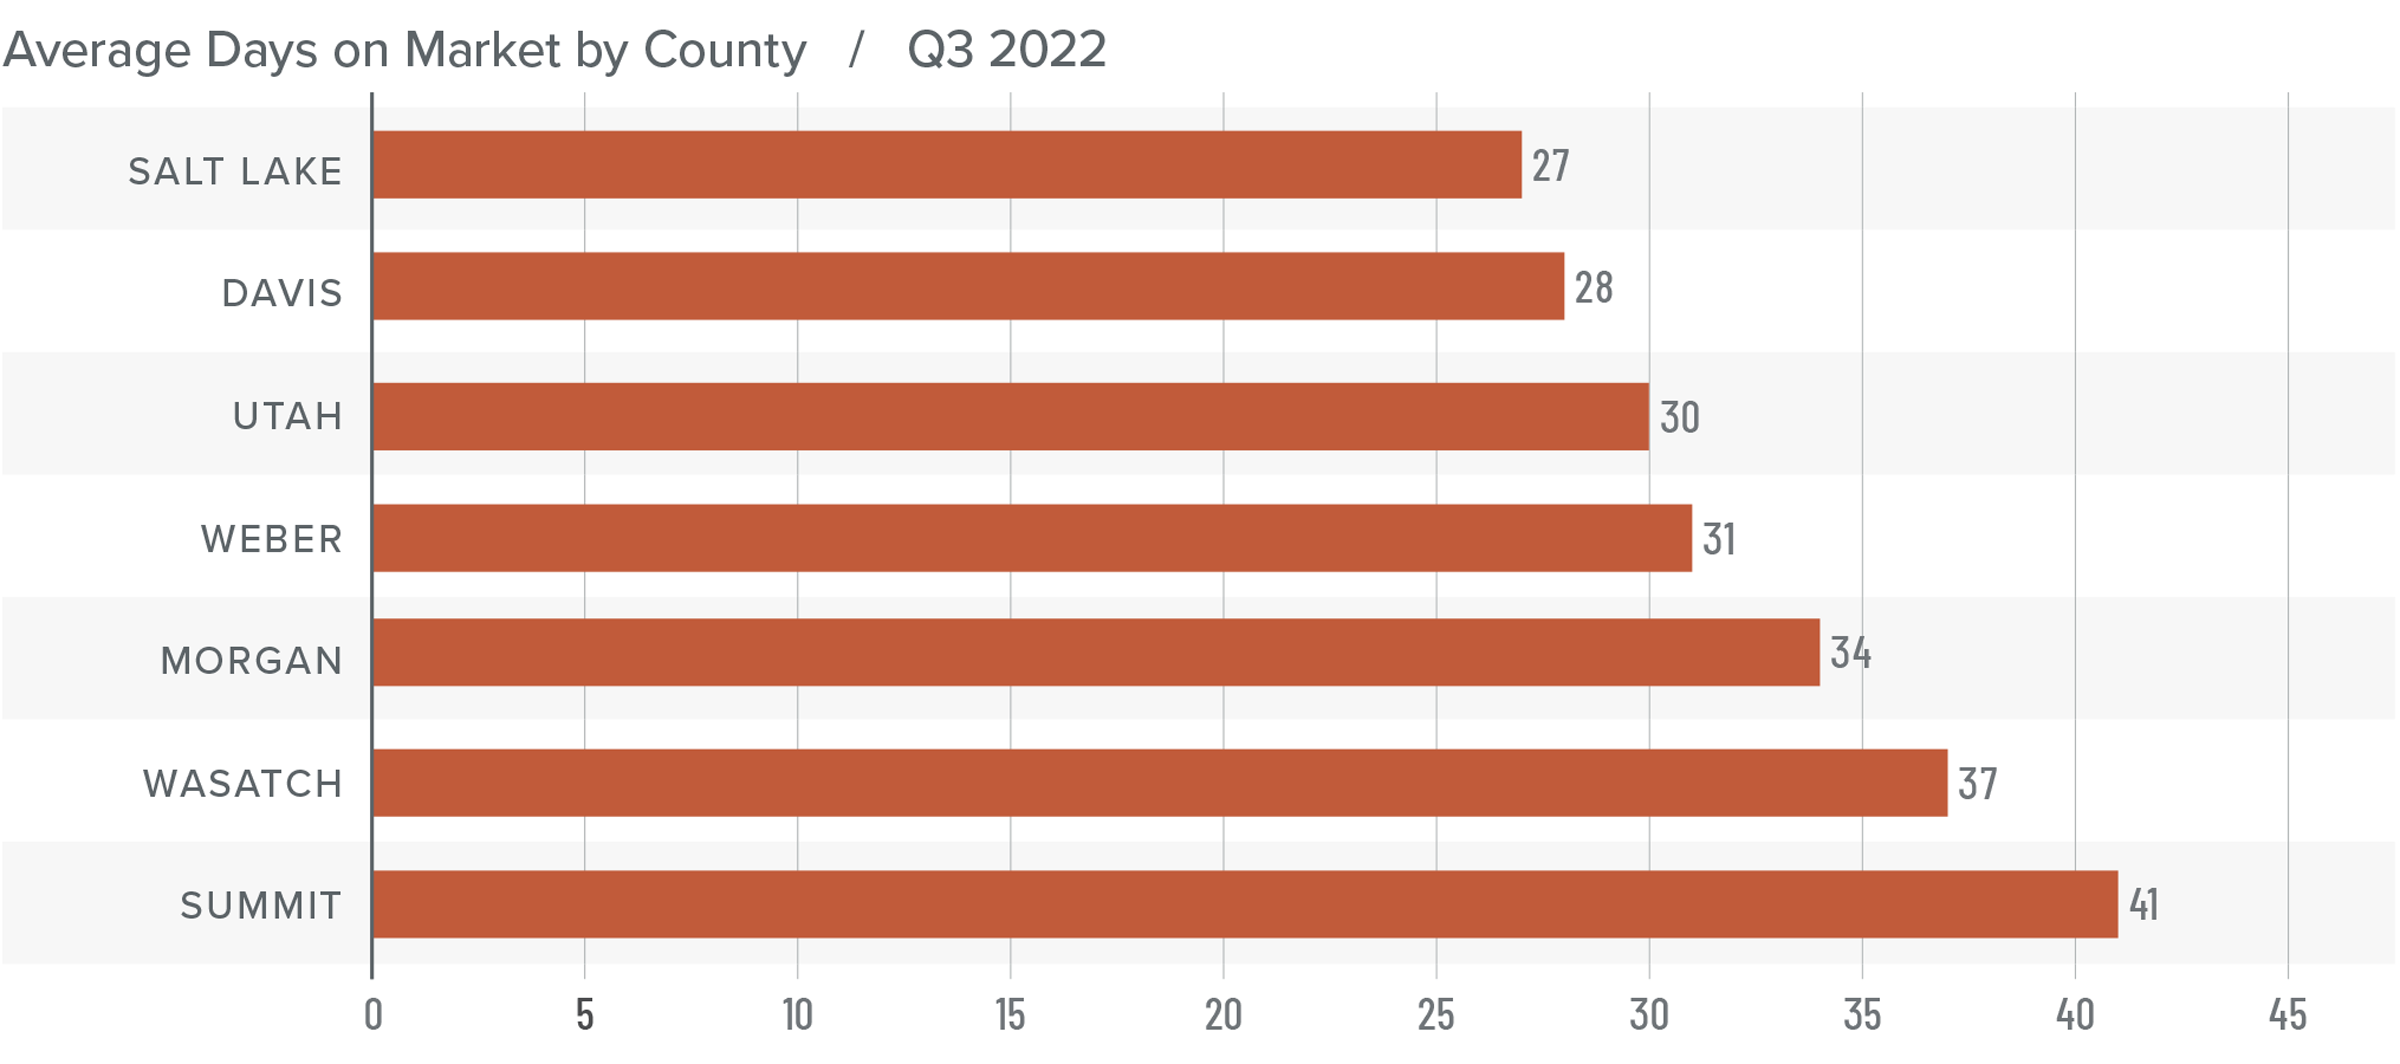 A bar graph showing the average days on market for homes in various counties in Utah for Q3 2022. Salt Lake County has the lowest DOM at 27, followed by Davis at 28, Utah at 30, Weber at 31, Morgan at 34, Wasatch at 37, and Summit at 41.